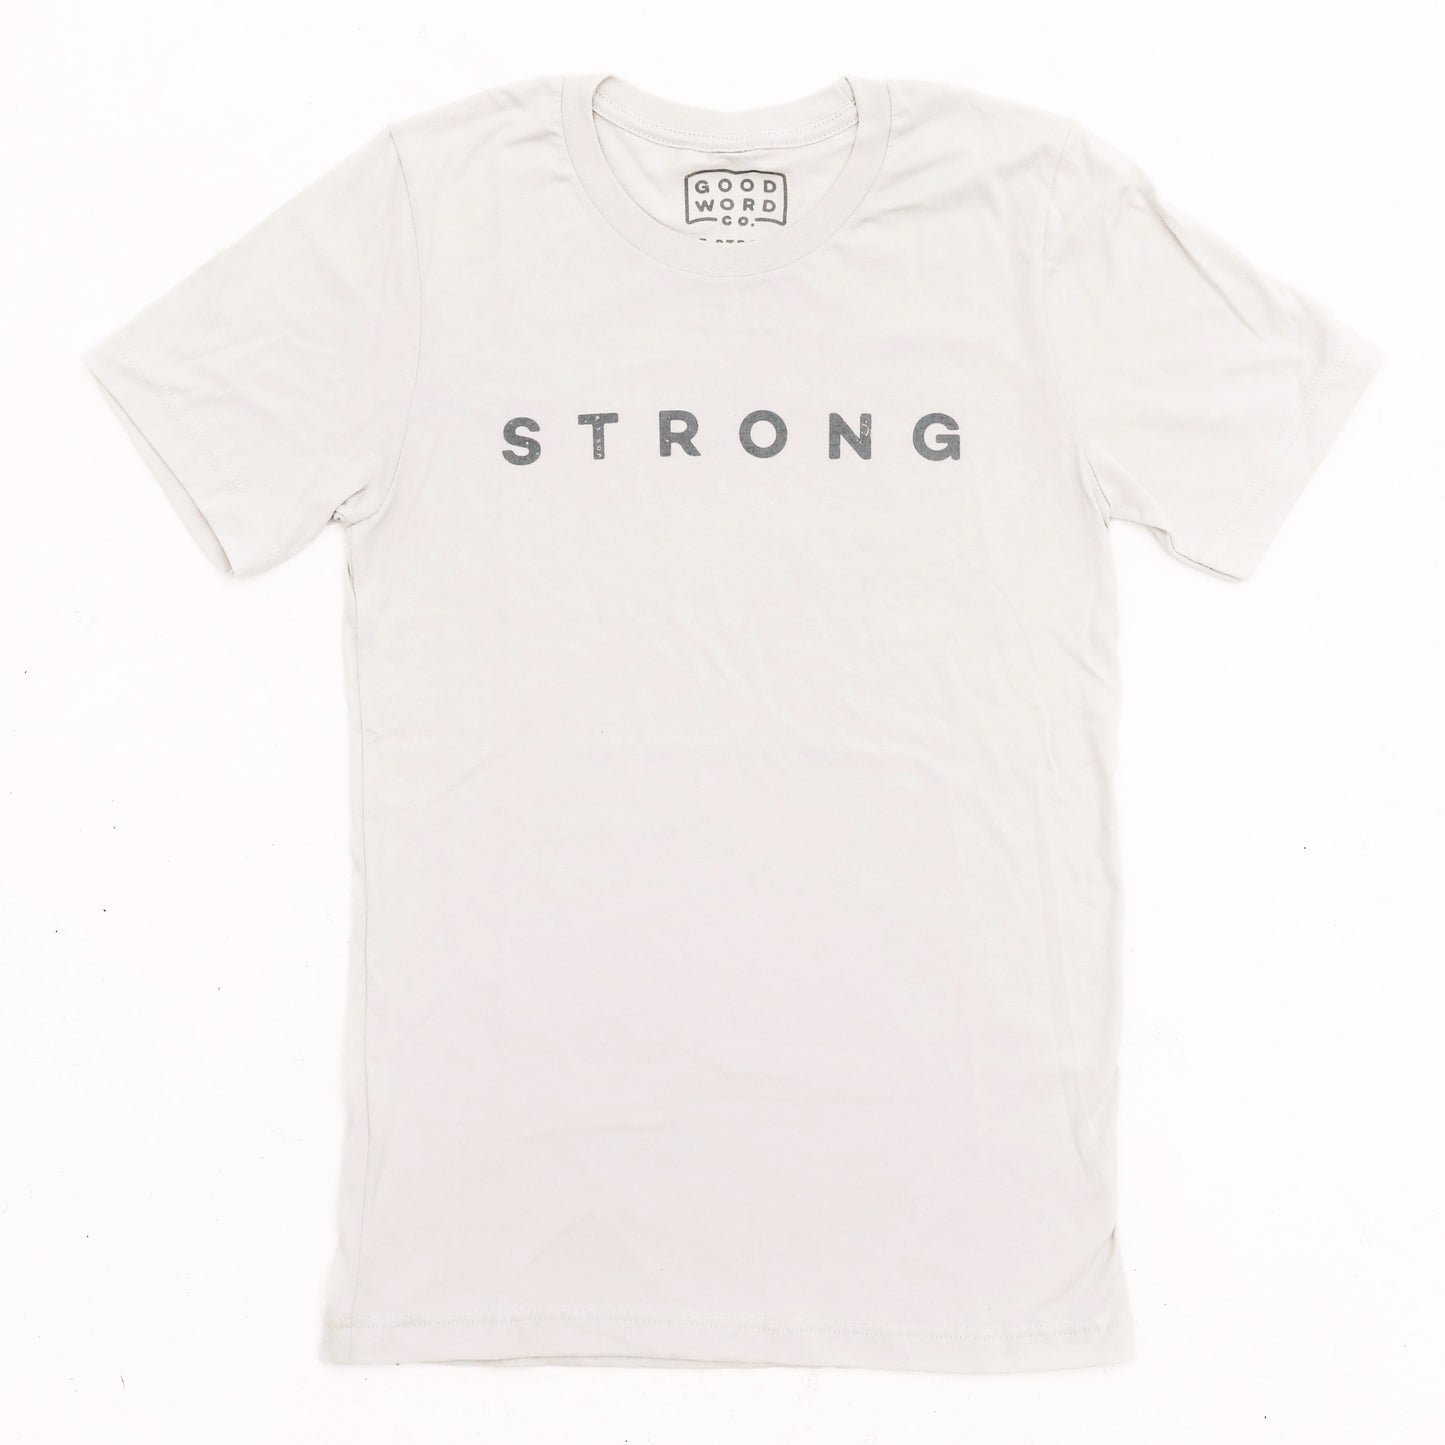 Strong 'One Word' T-Shirt